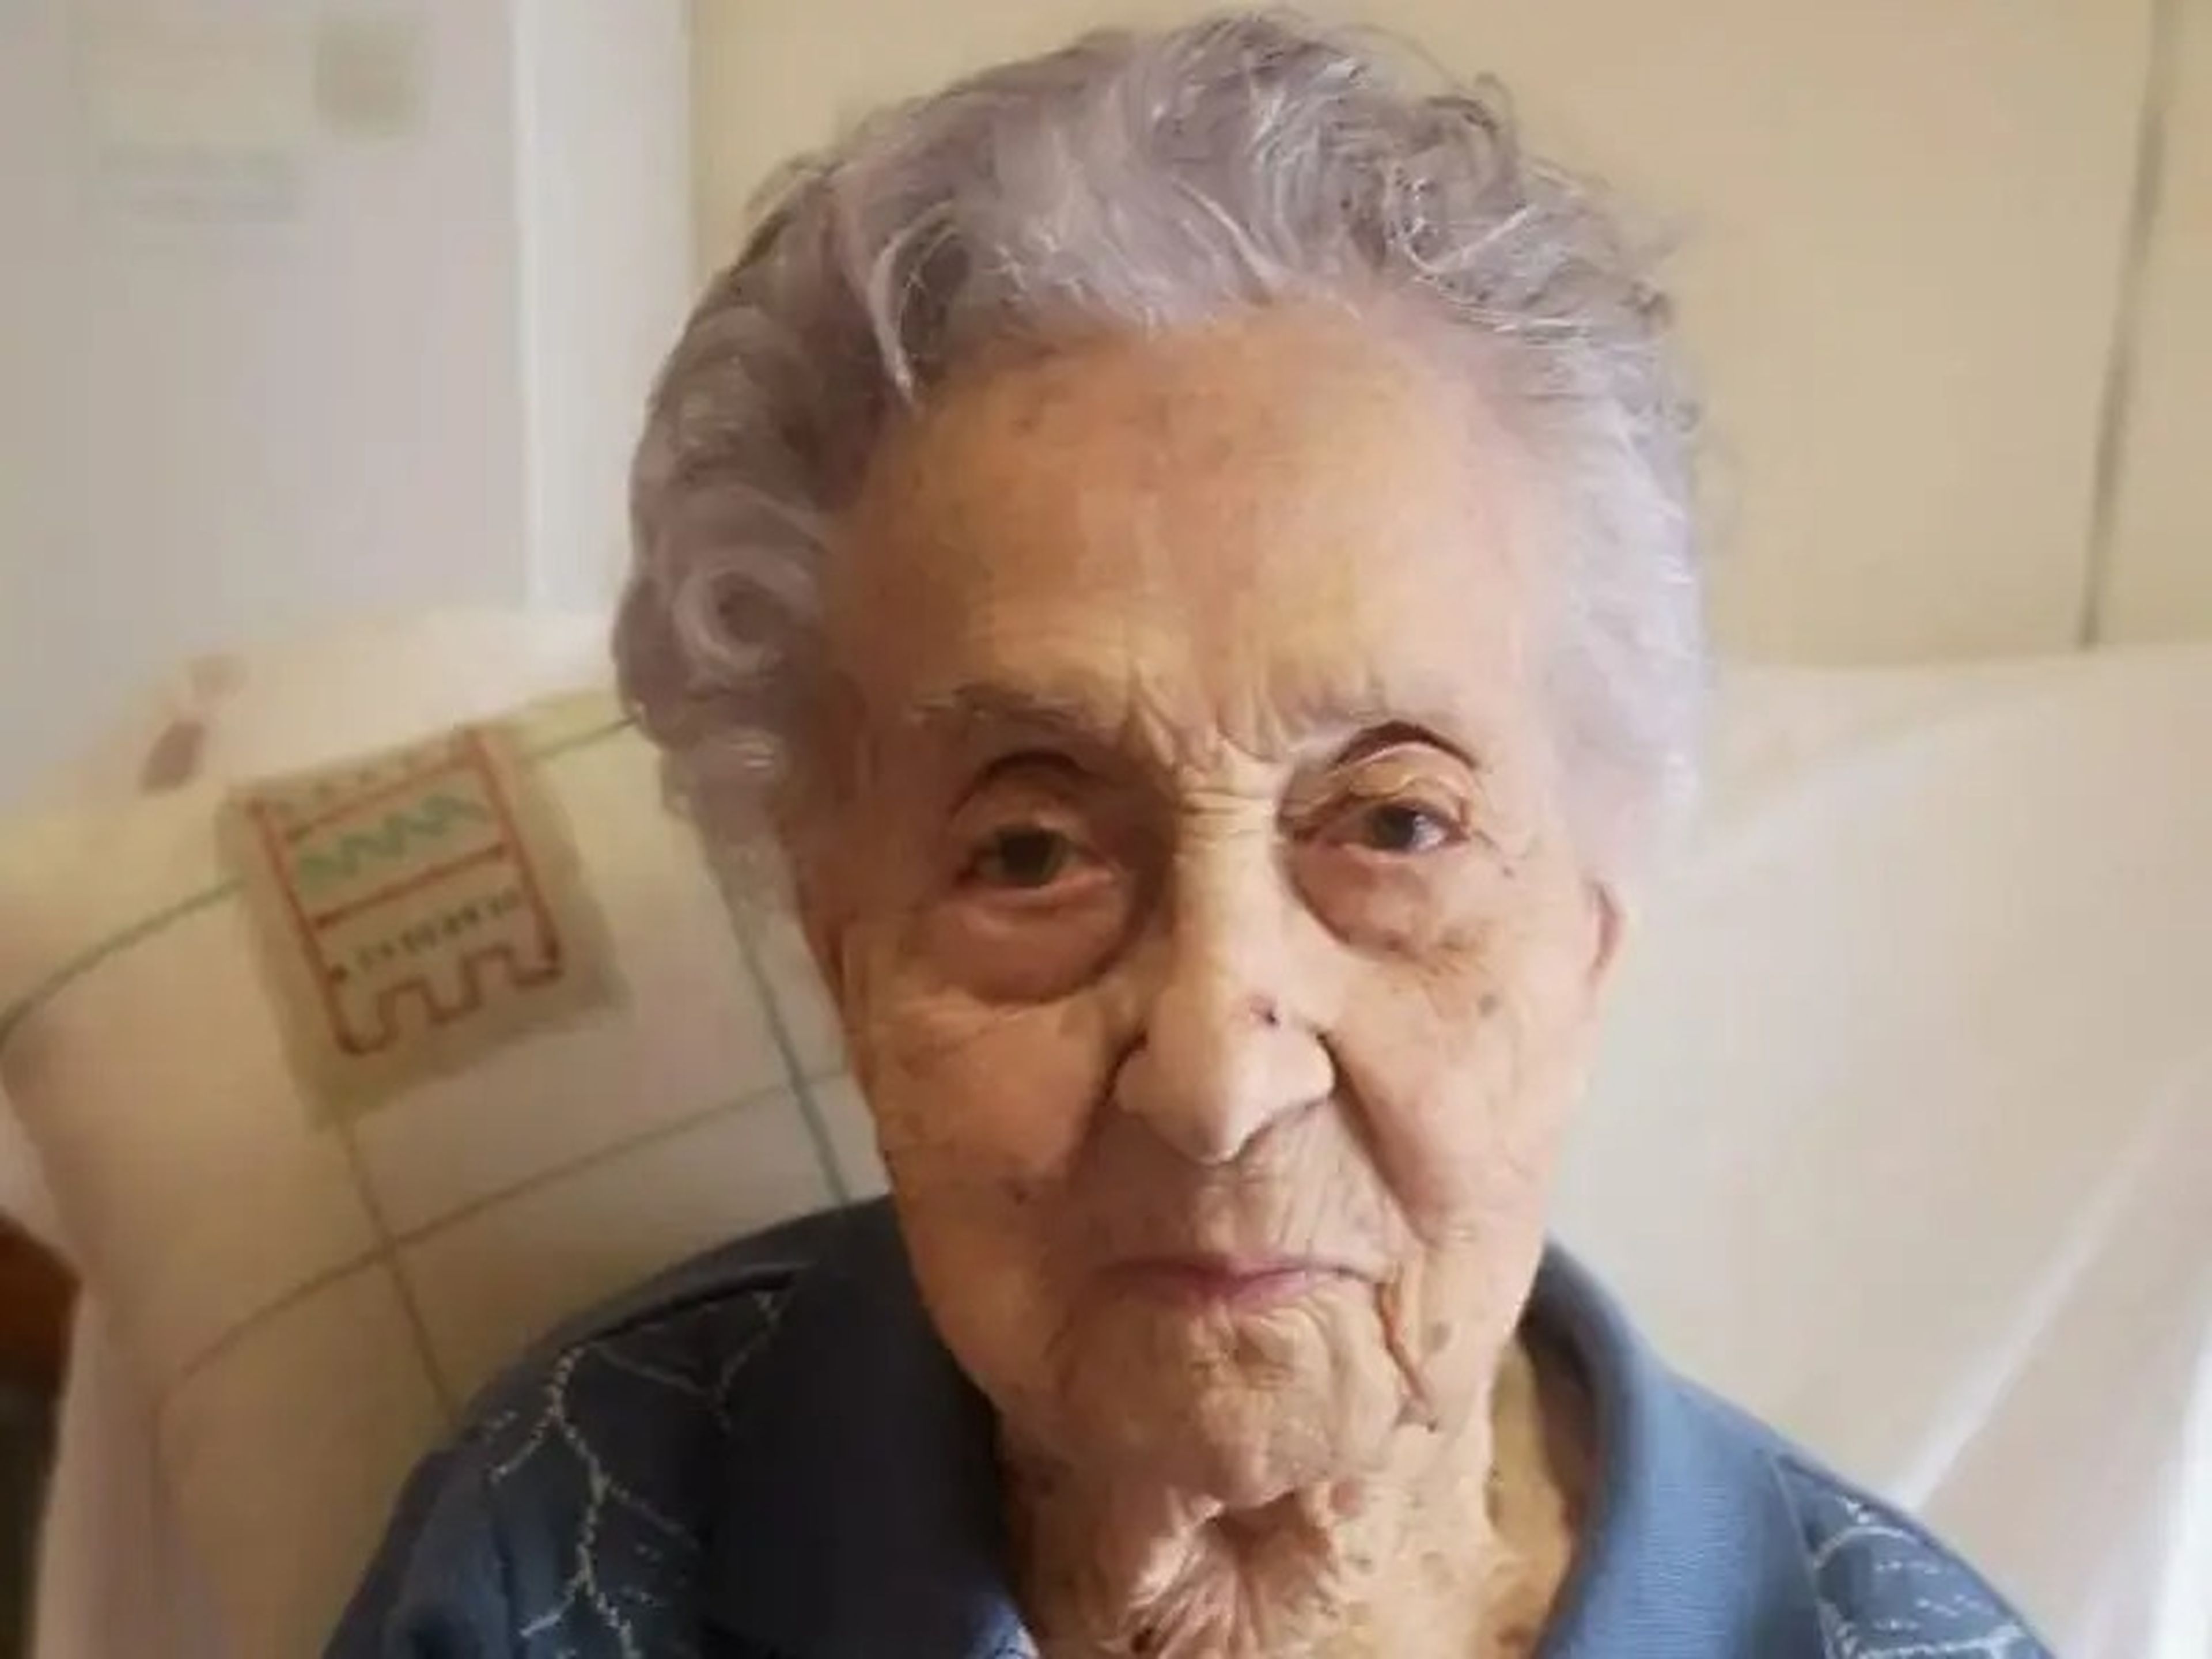 The world's oldest person as of January 2023, María Branyas Morera